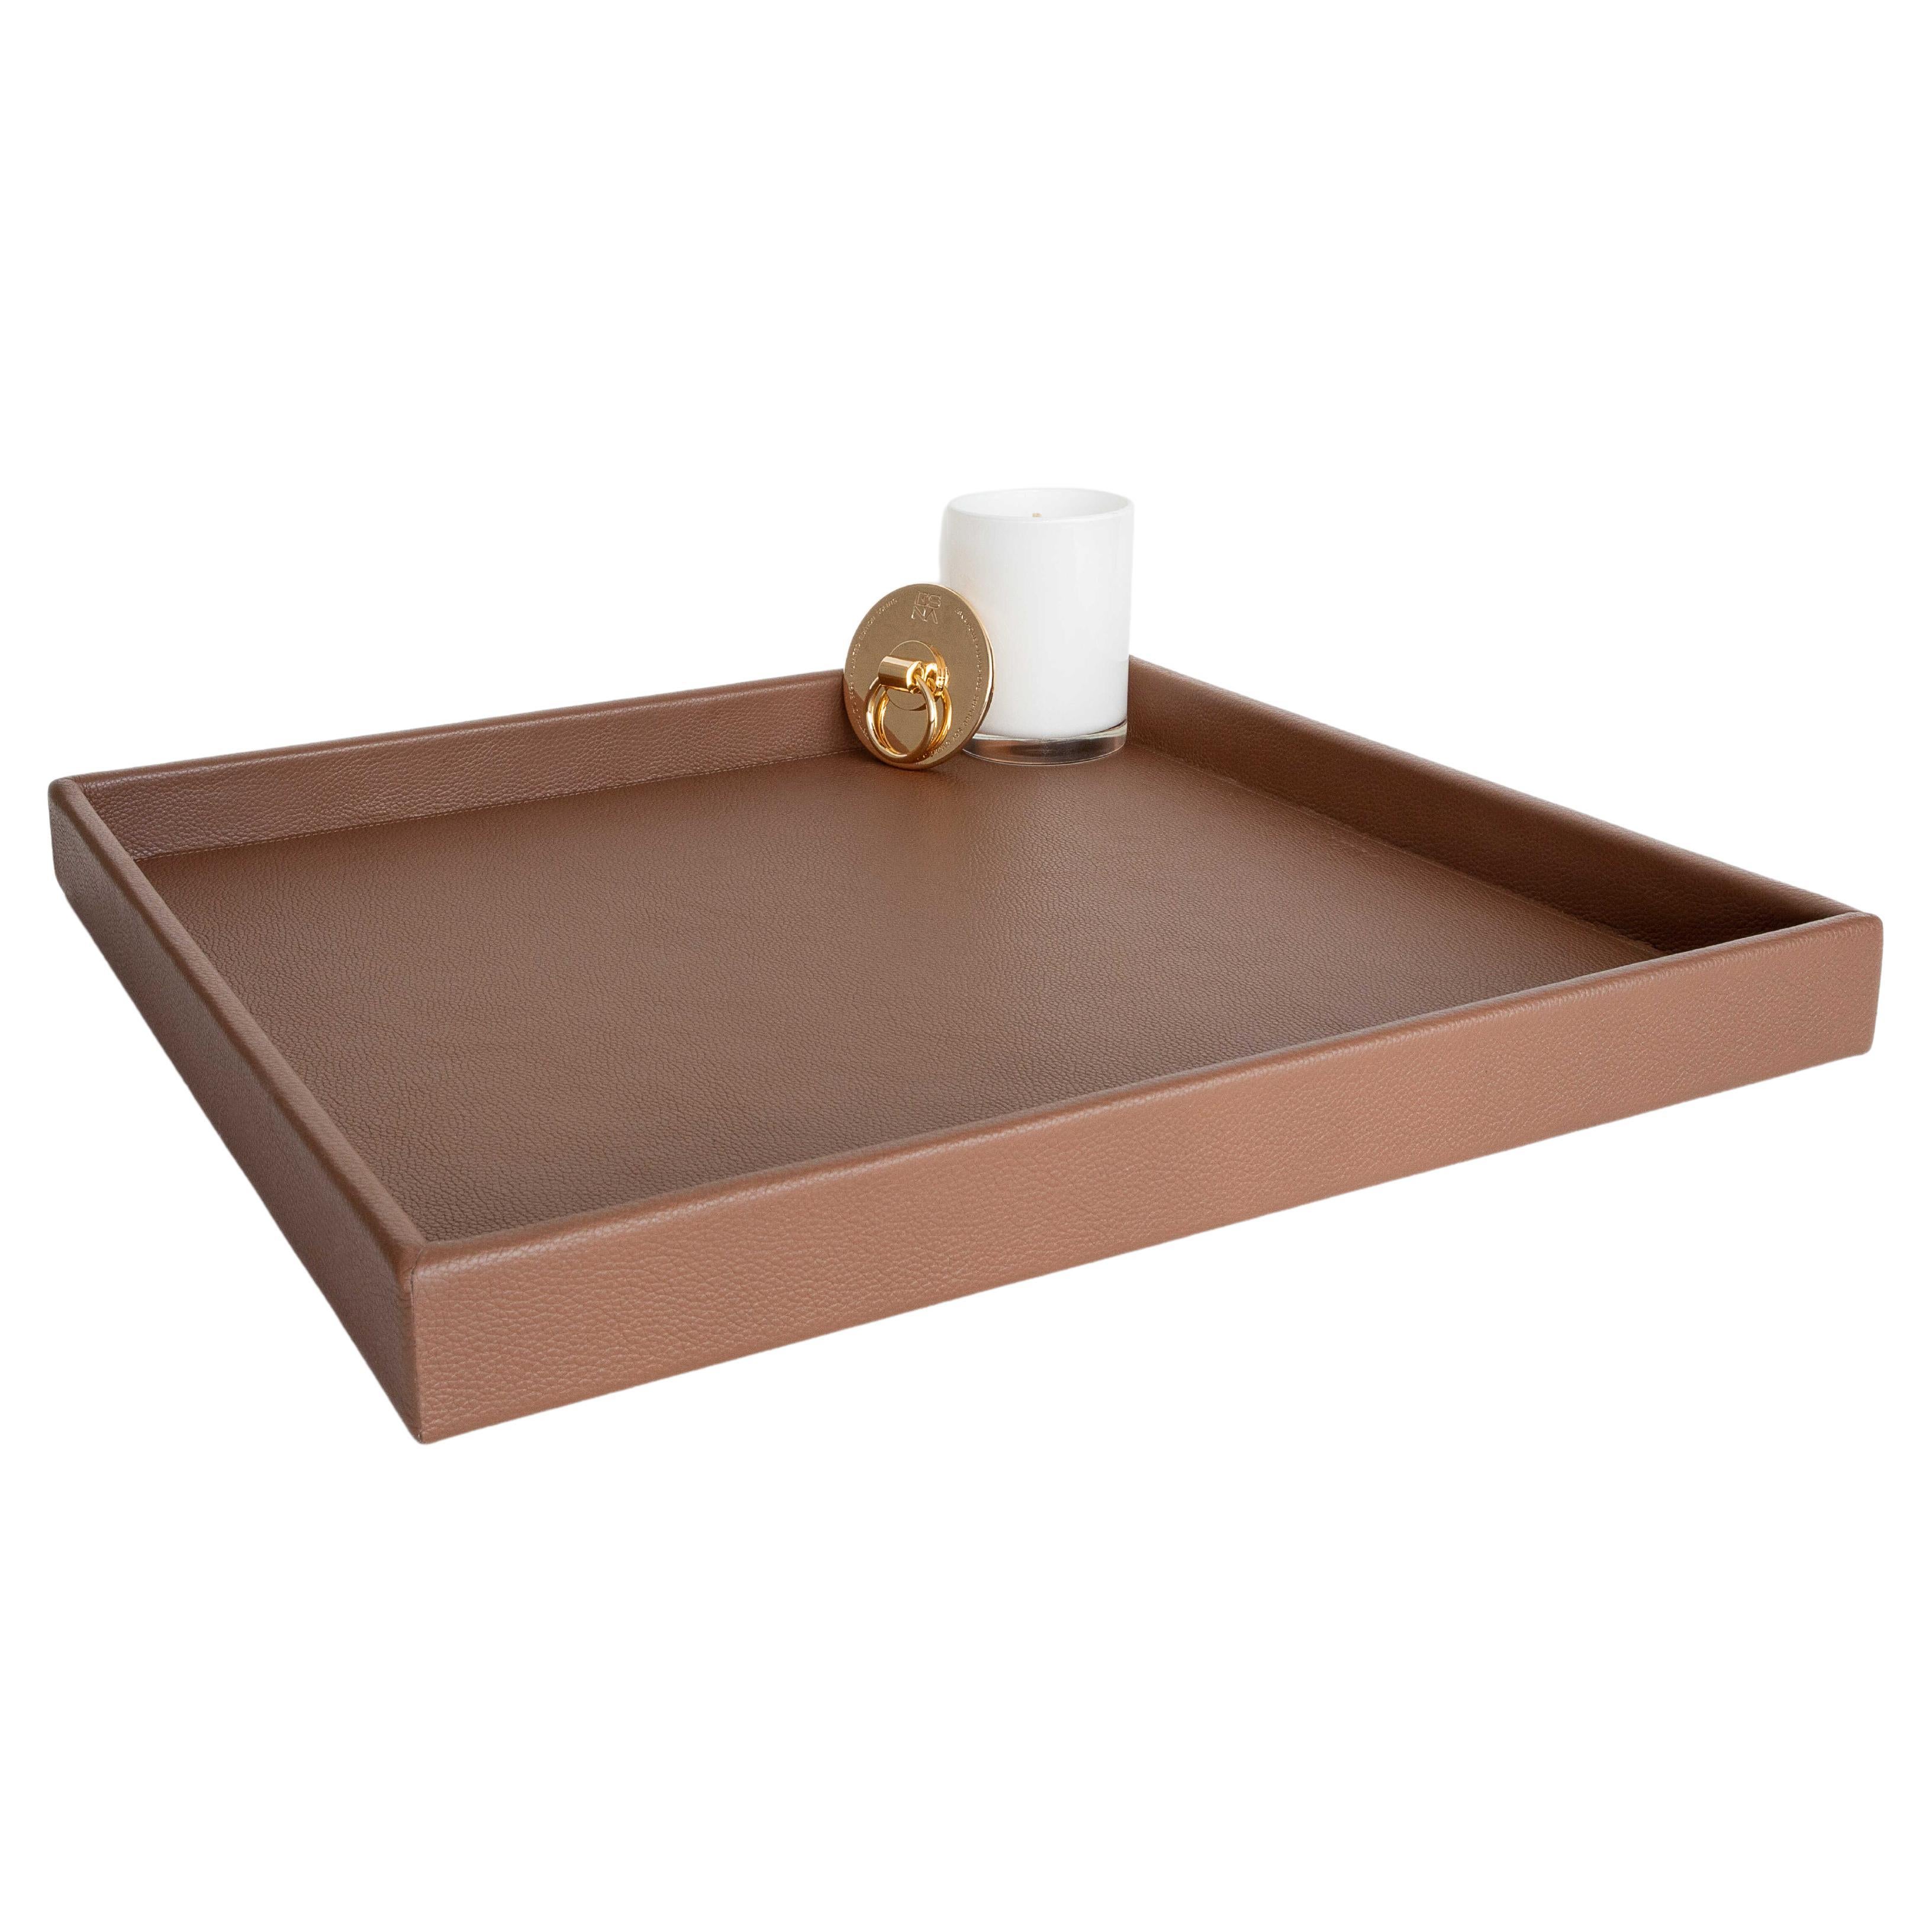 Leather Tray, Large B Square Tray, Handmade - Color: Caramel For Sale